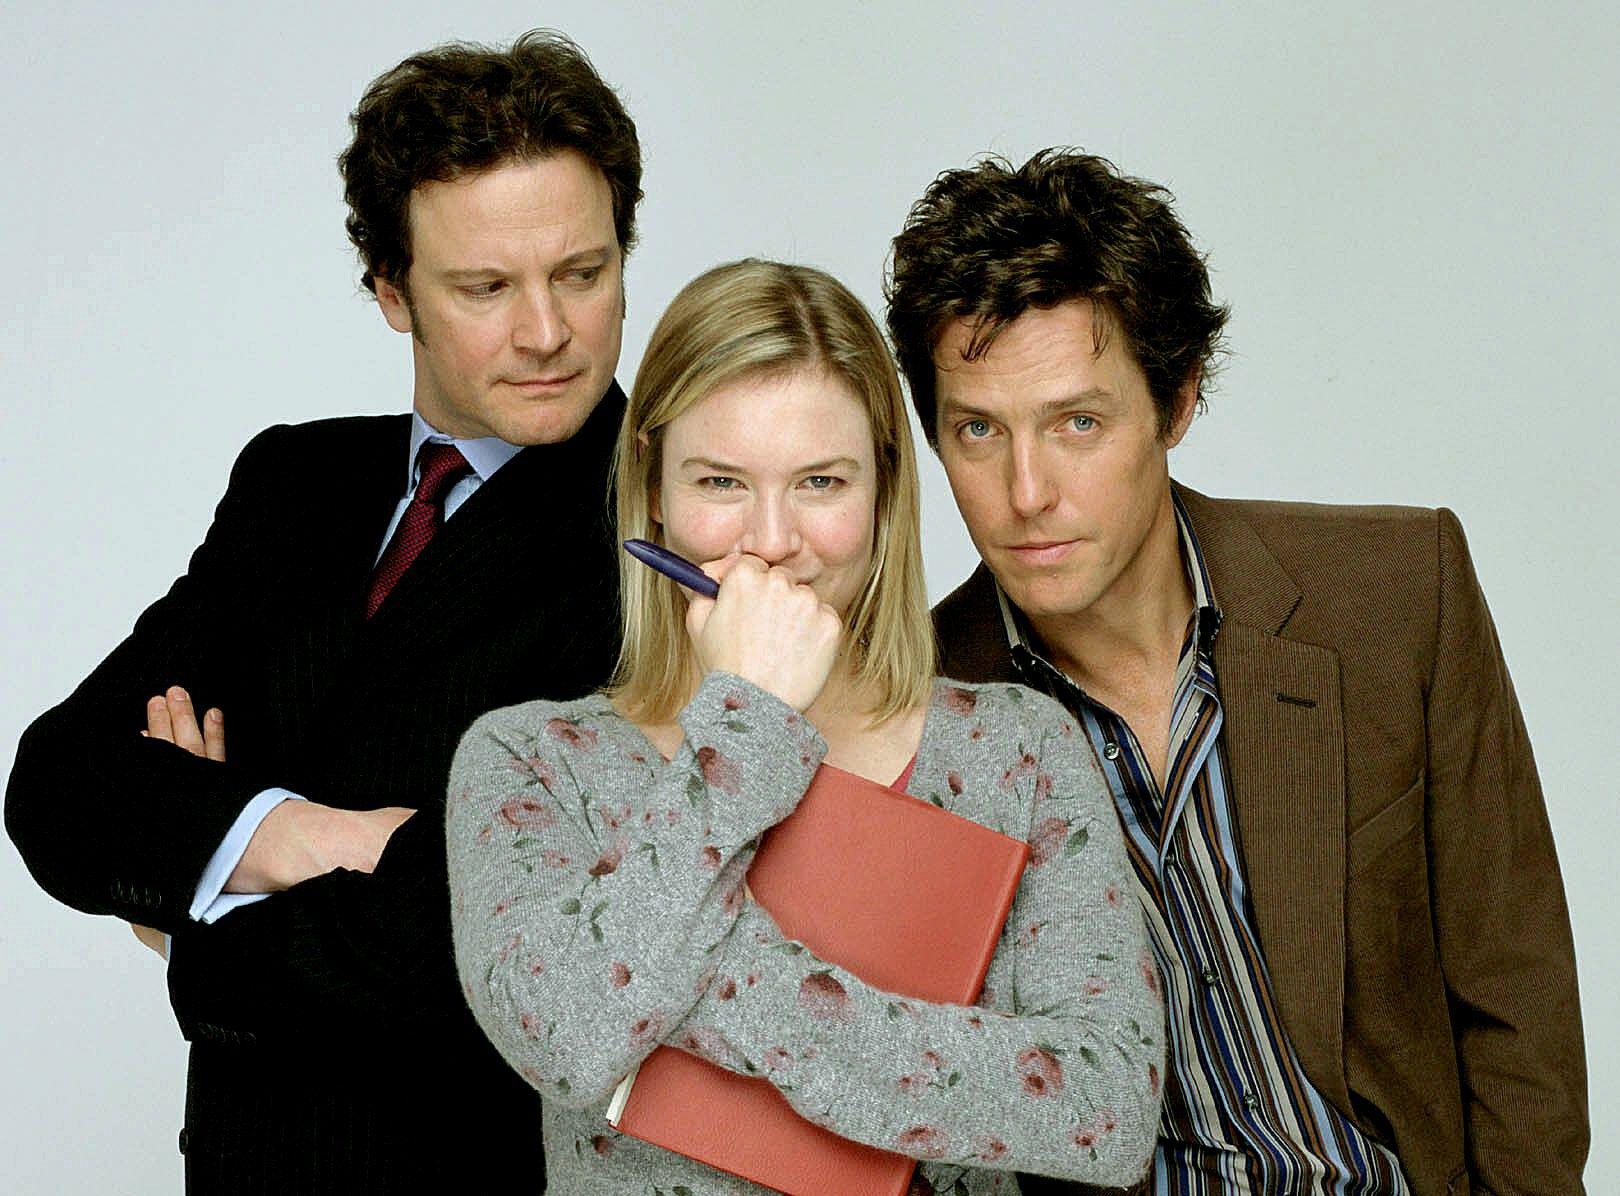 Renee will be reprising her role alongside Hugh Grant, right, who returns as her former flame Daniel Cleaver but her husband Mark Darcy, played by Colin Firth, will not be featuring